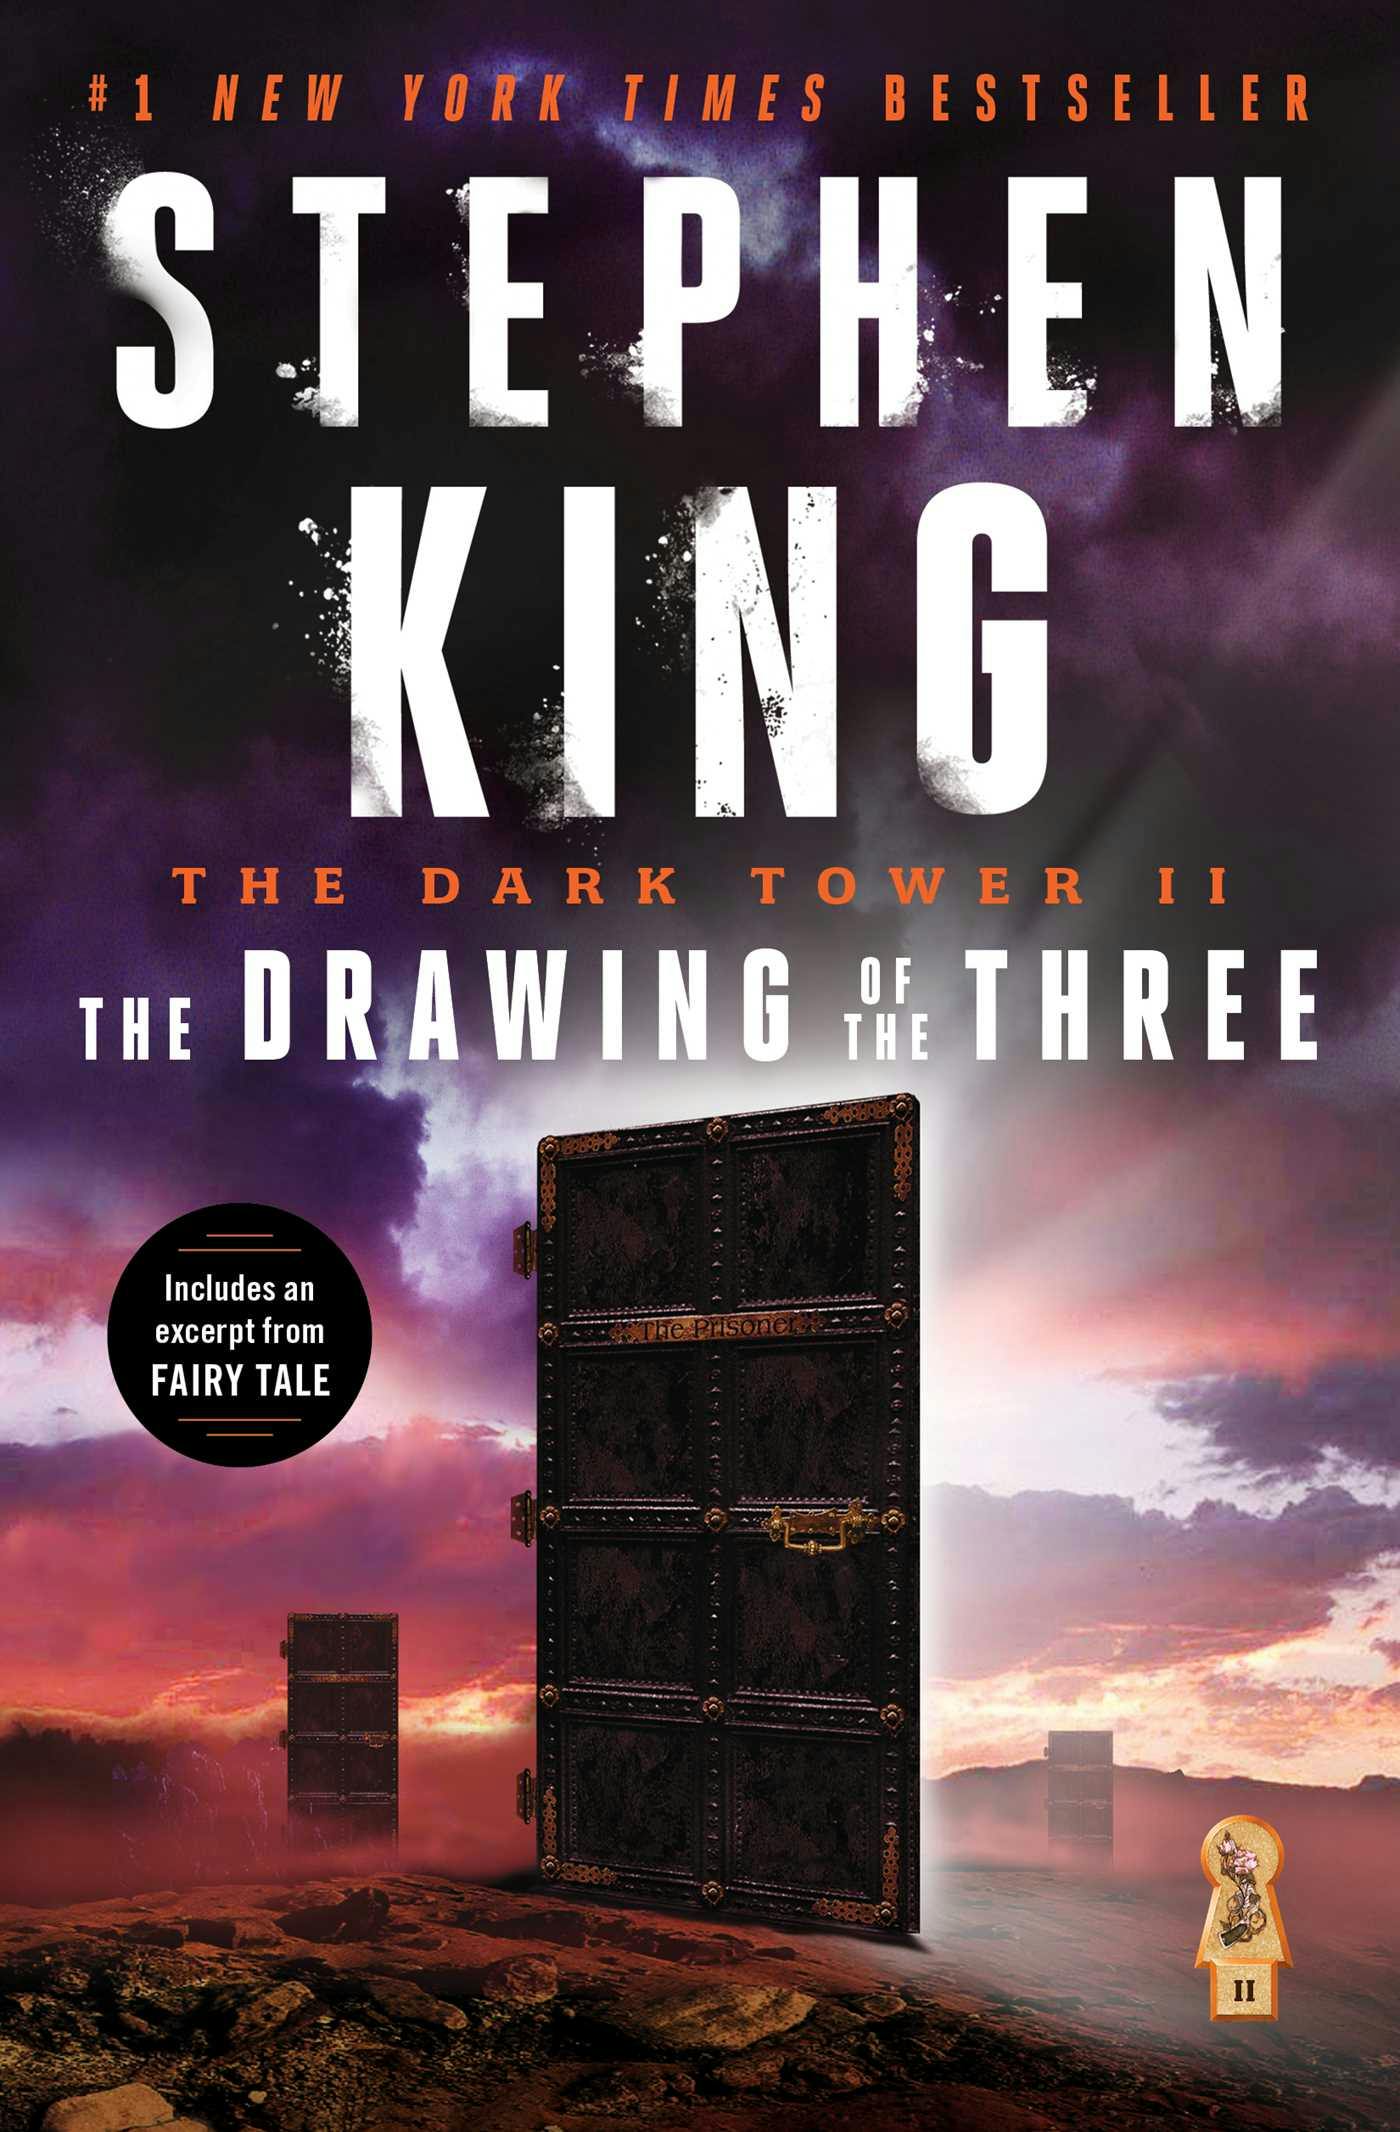 The Dark Tower II: The Drawing of the Three - Stephen King